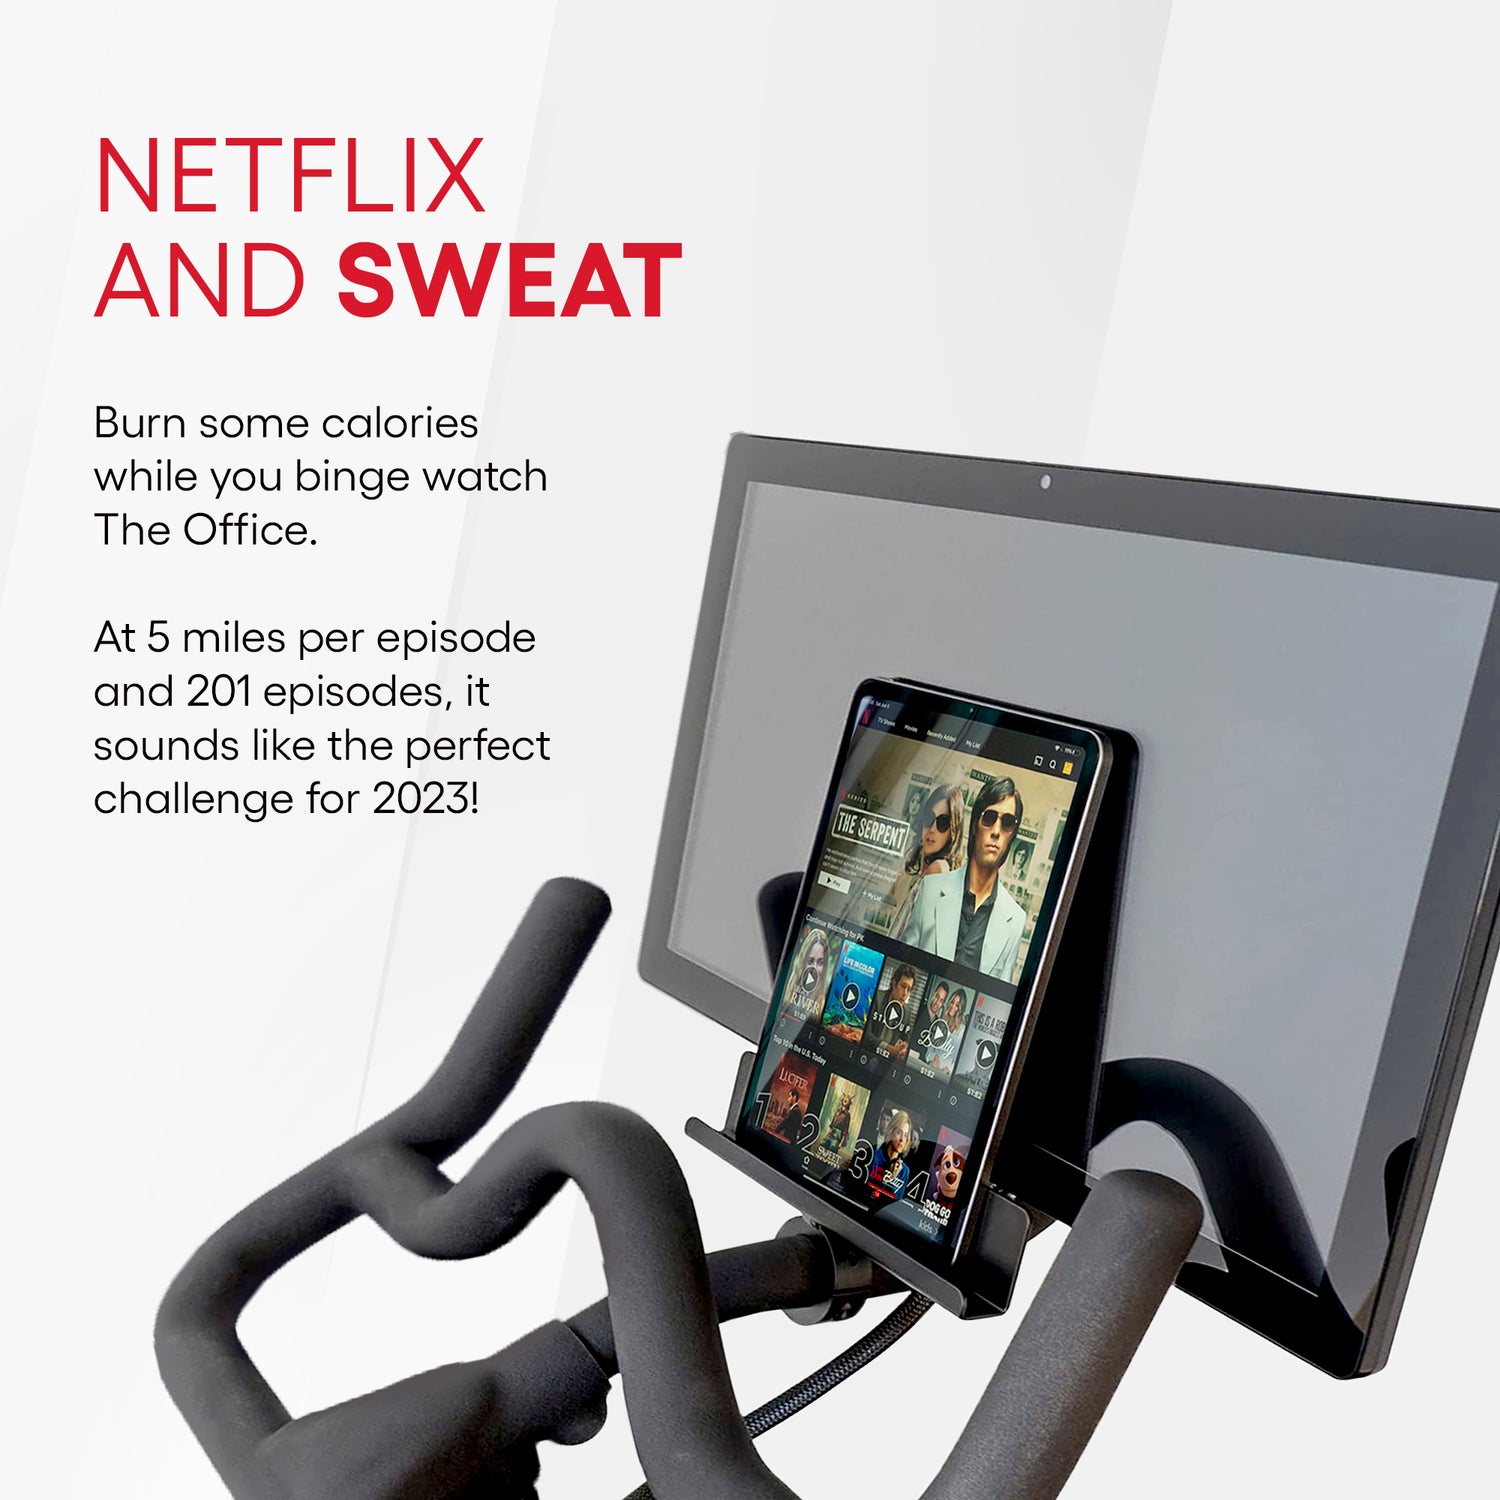 Netflix and sweat with TrubliFit's tablet and iPad holder